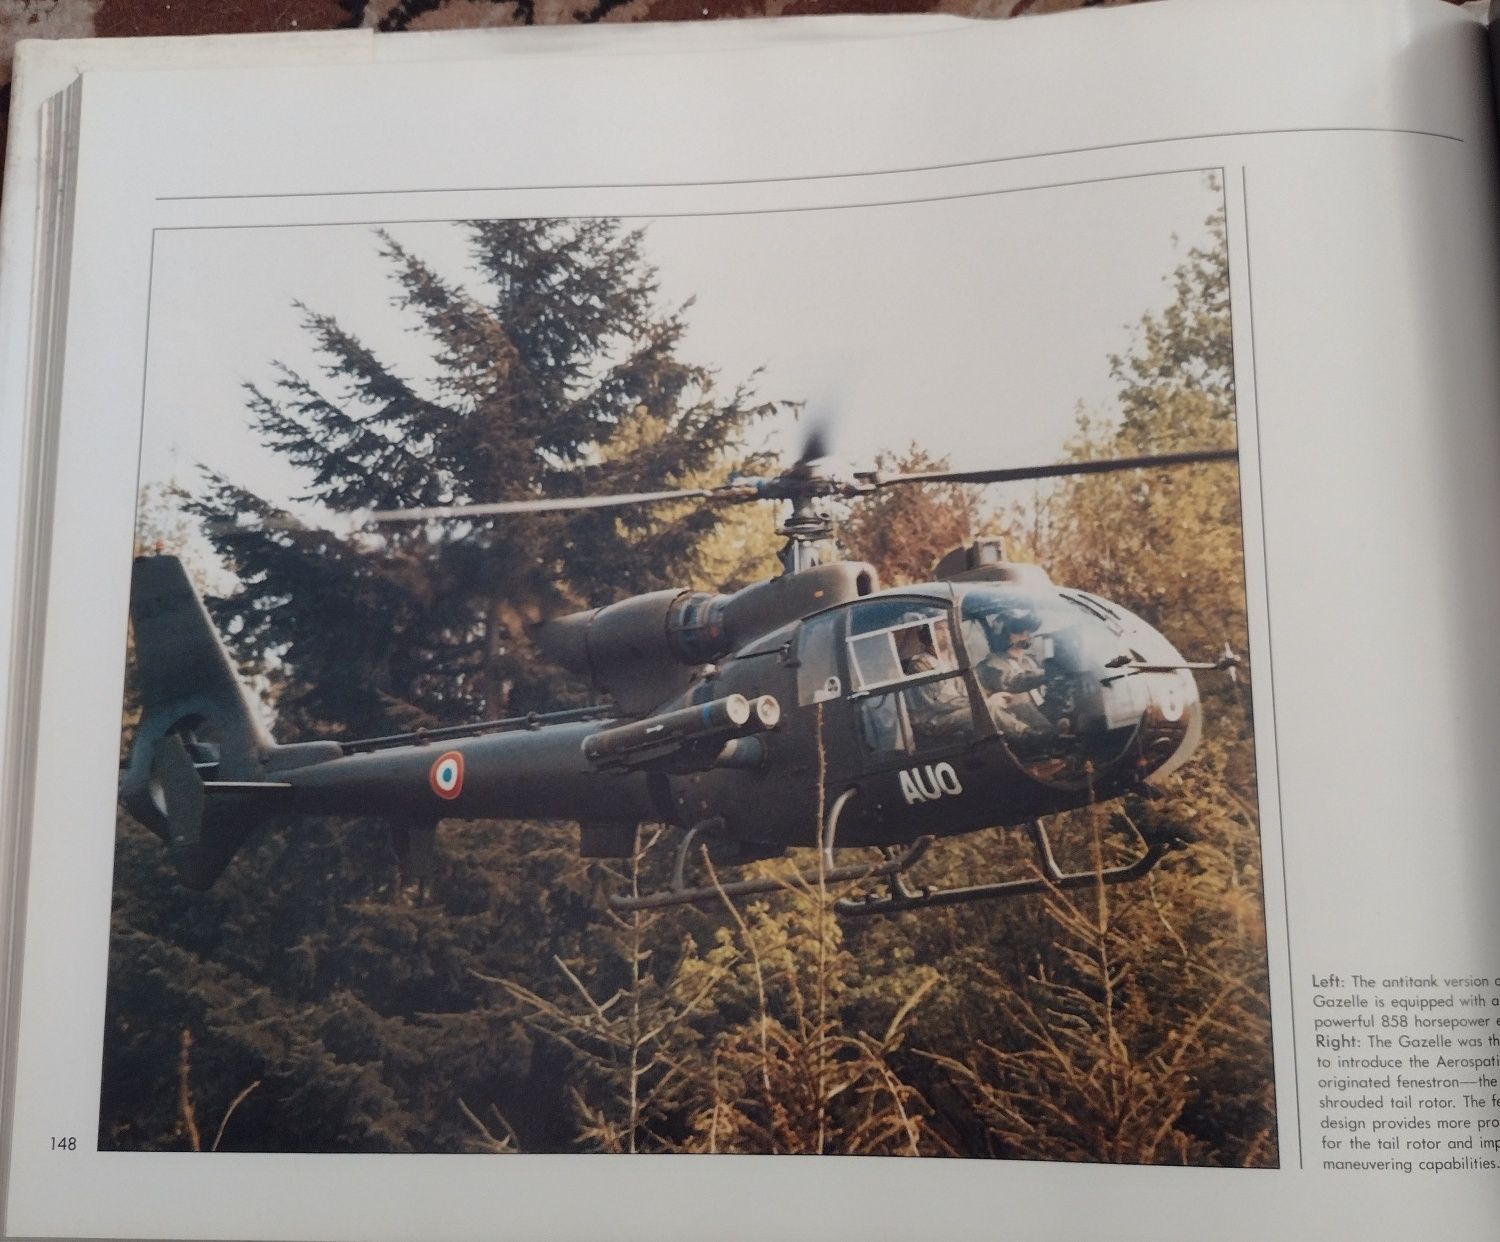 The illustrated history of Helicopters